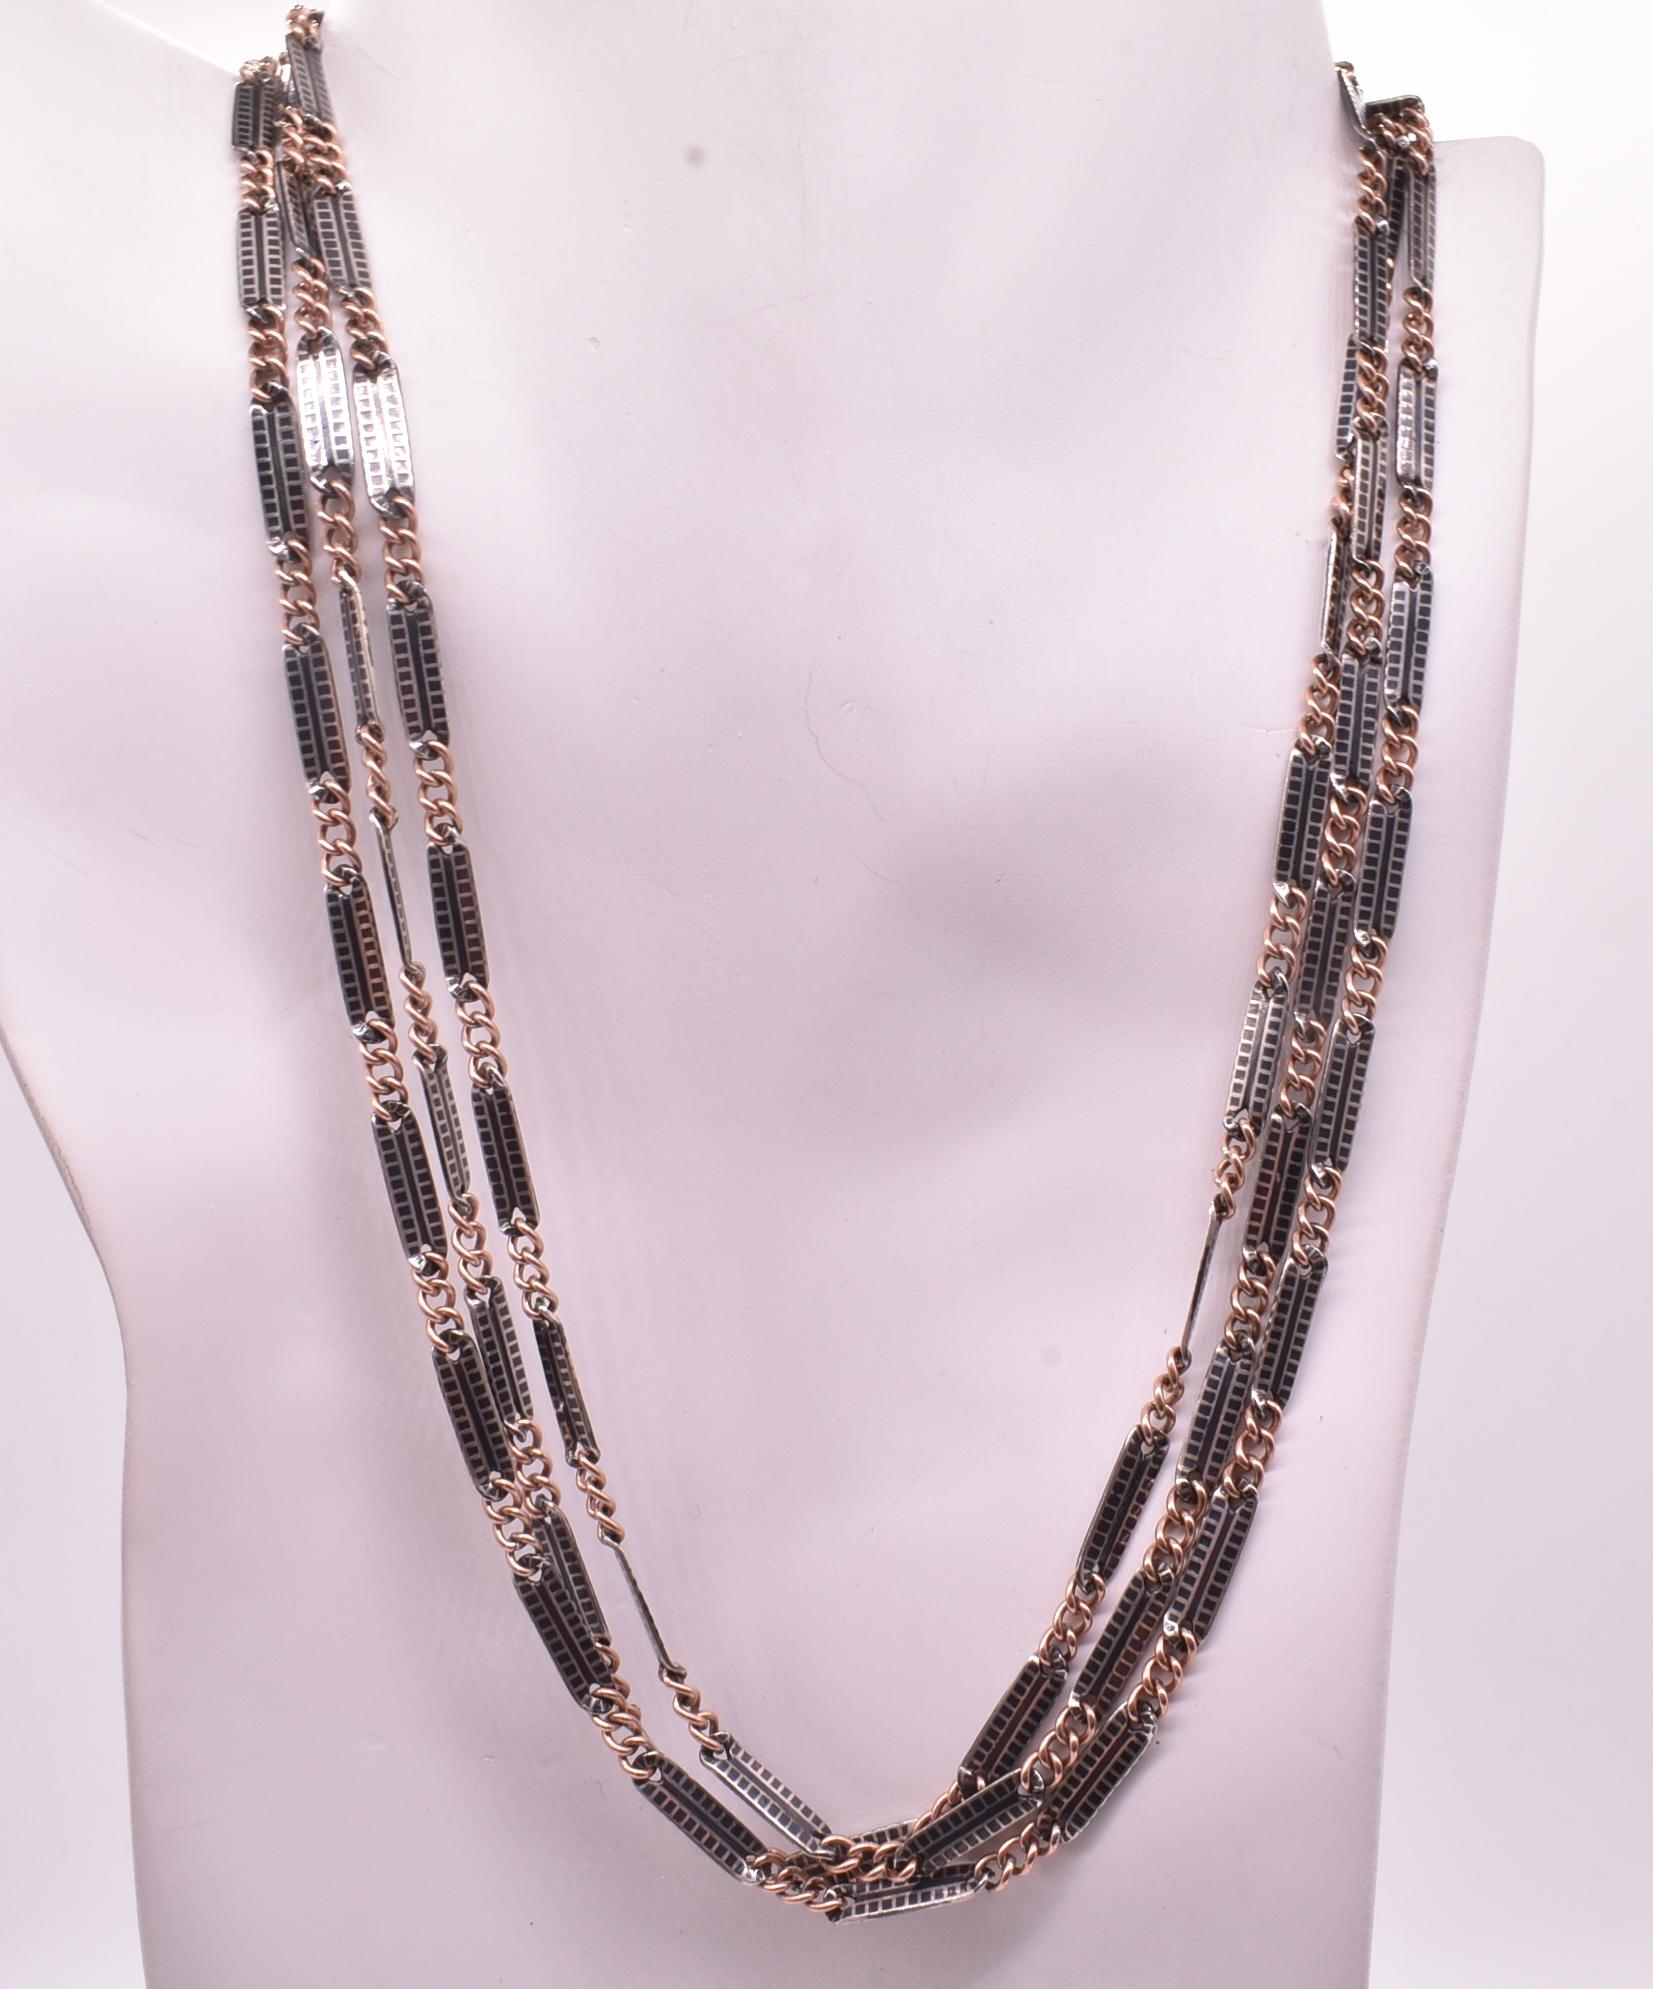 This niello chain was made from a an ancient technique called niello; the ancient art of of decorating silver which was revived in the 19th century and adopted by English jewelry artisans. The word Niello derives from the Latin form of niger, or